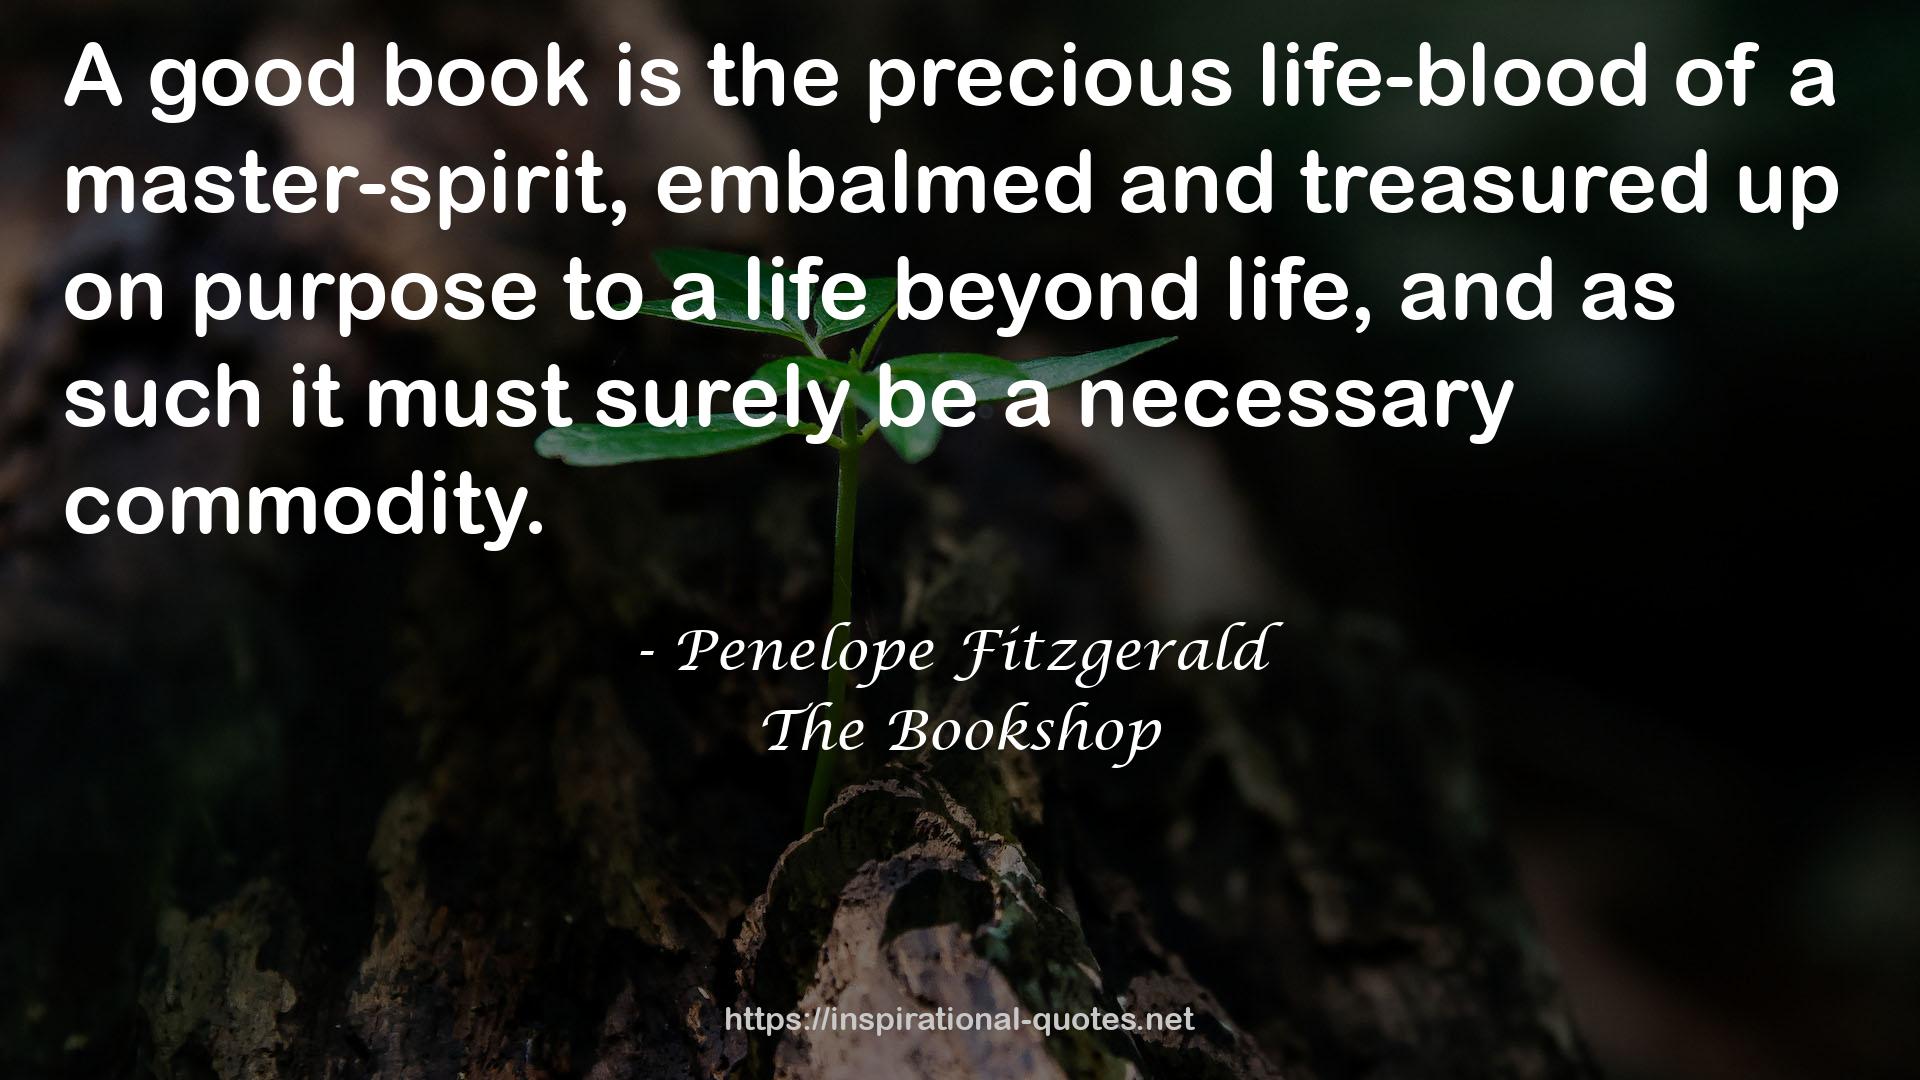 Penelope Fitzgerald QUOTES